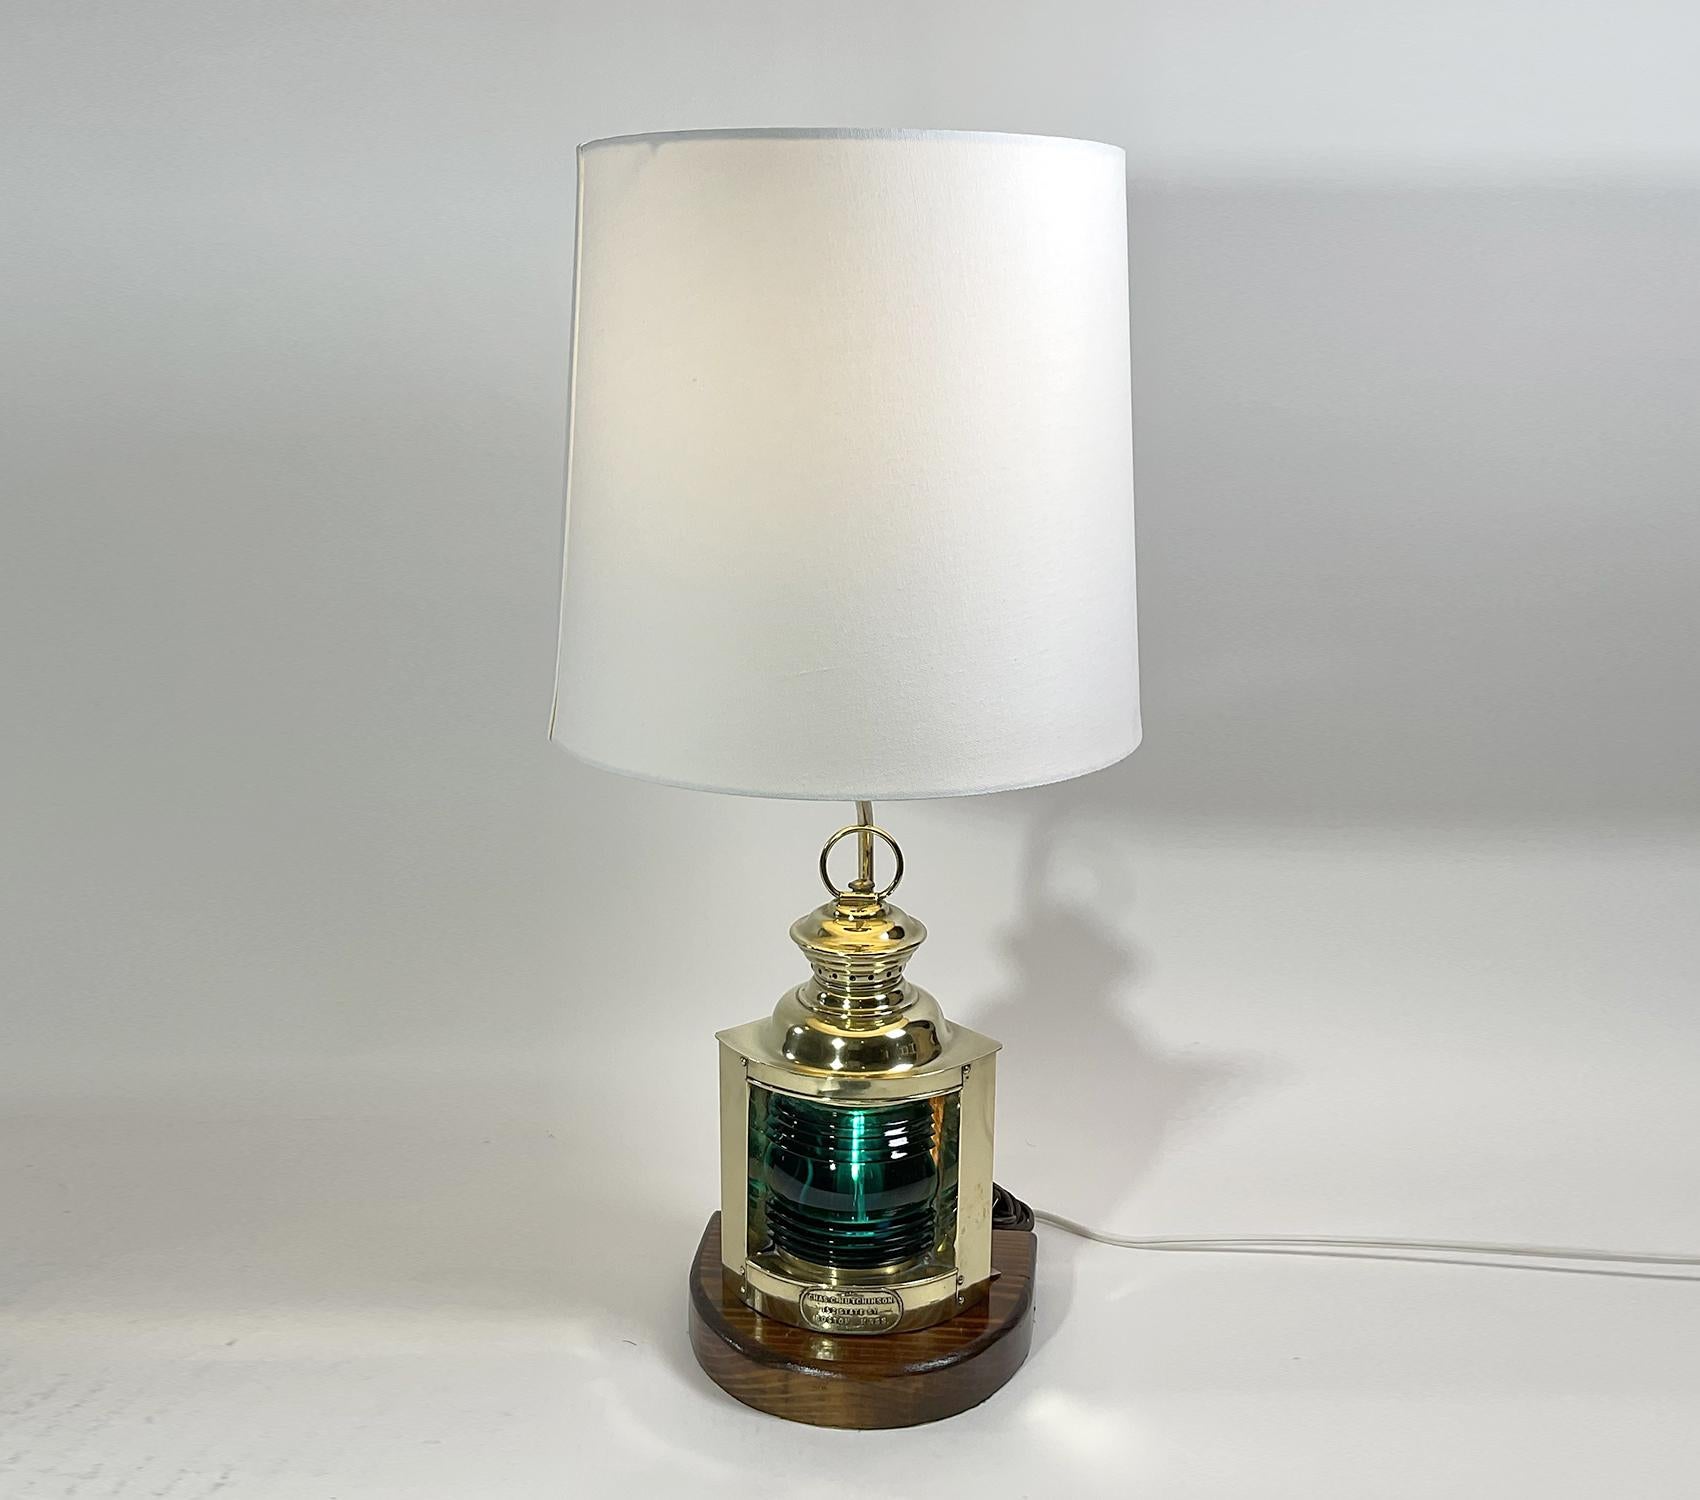 Solid brass ships lantern with Fresnel glass lens. On front of ship lantern is a brass label that read: Chas C. Hutchinson, 152 ST., Boston, Mass. Great early twentieth century lantern, mounted to a wood base. Circa 1925. Beautiful green lens.